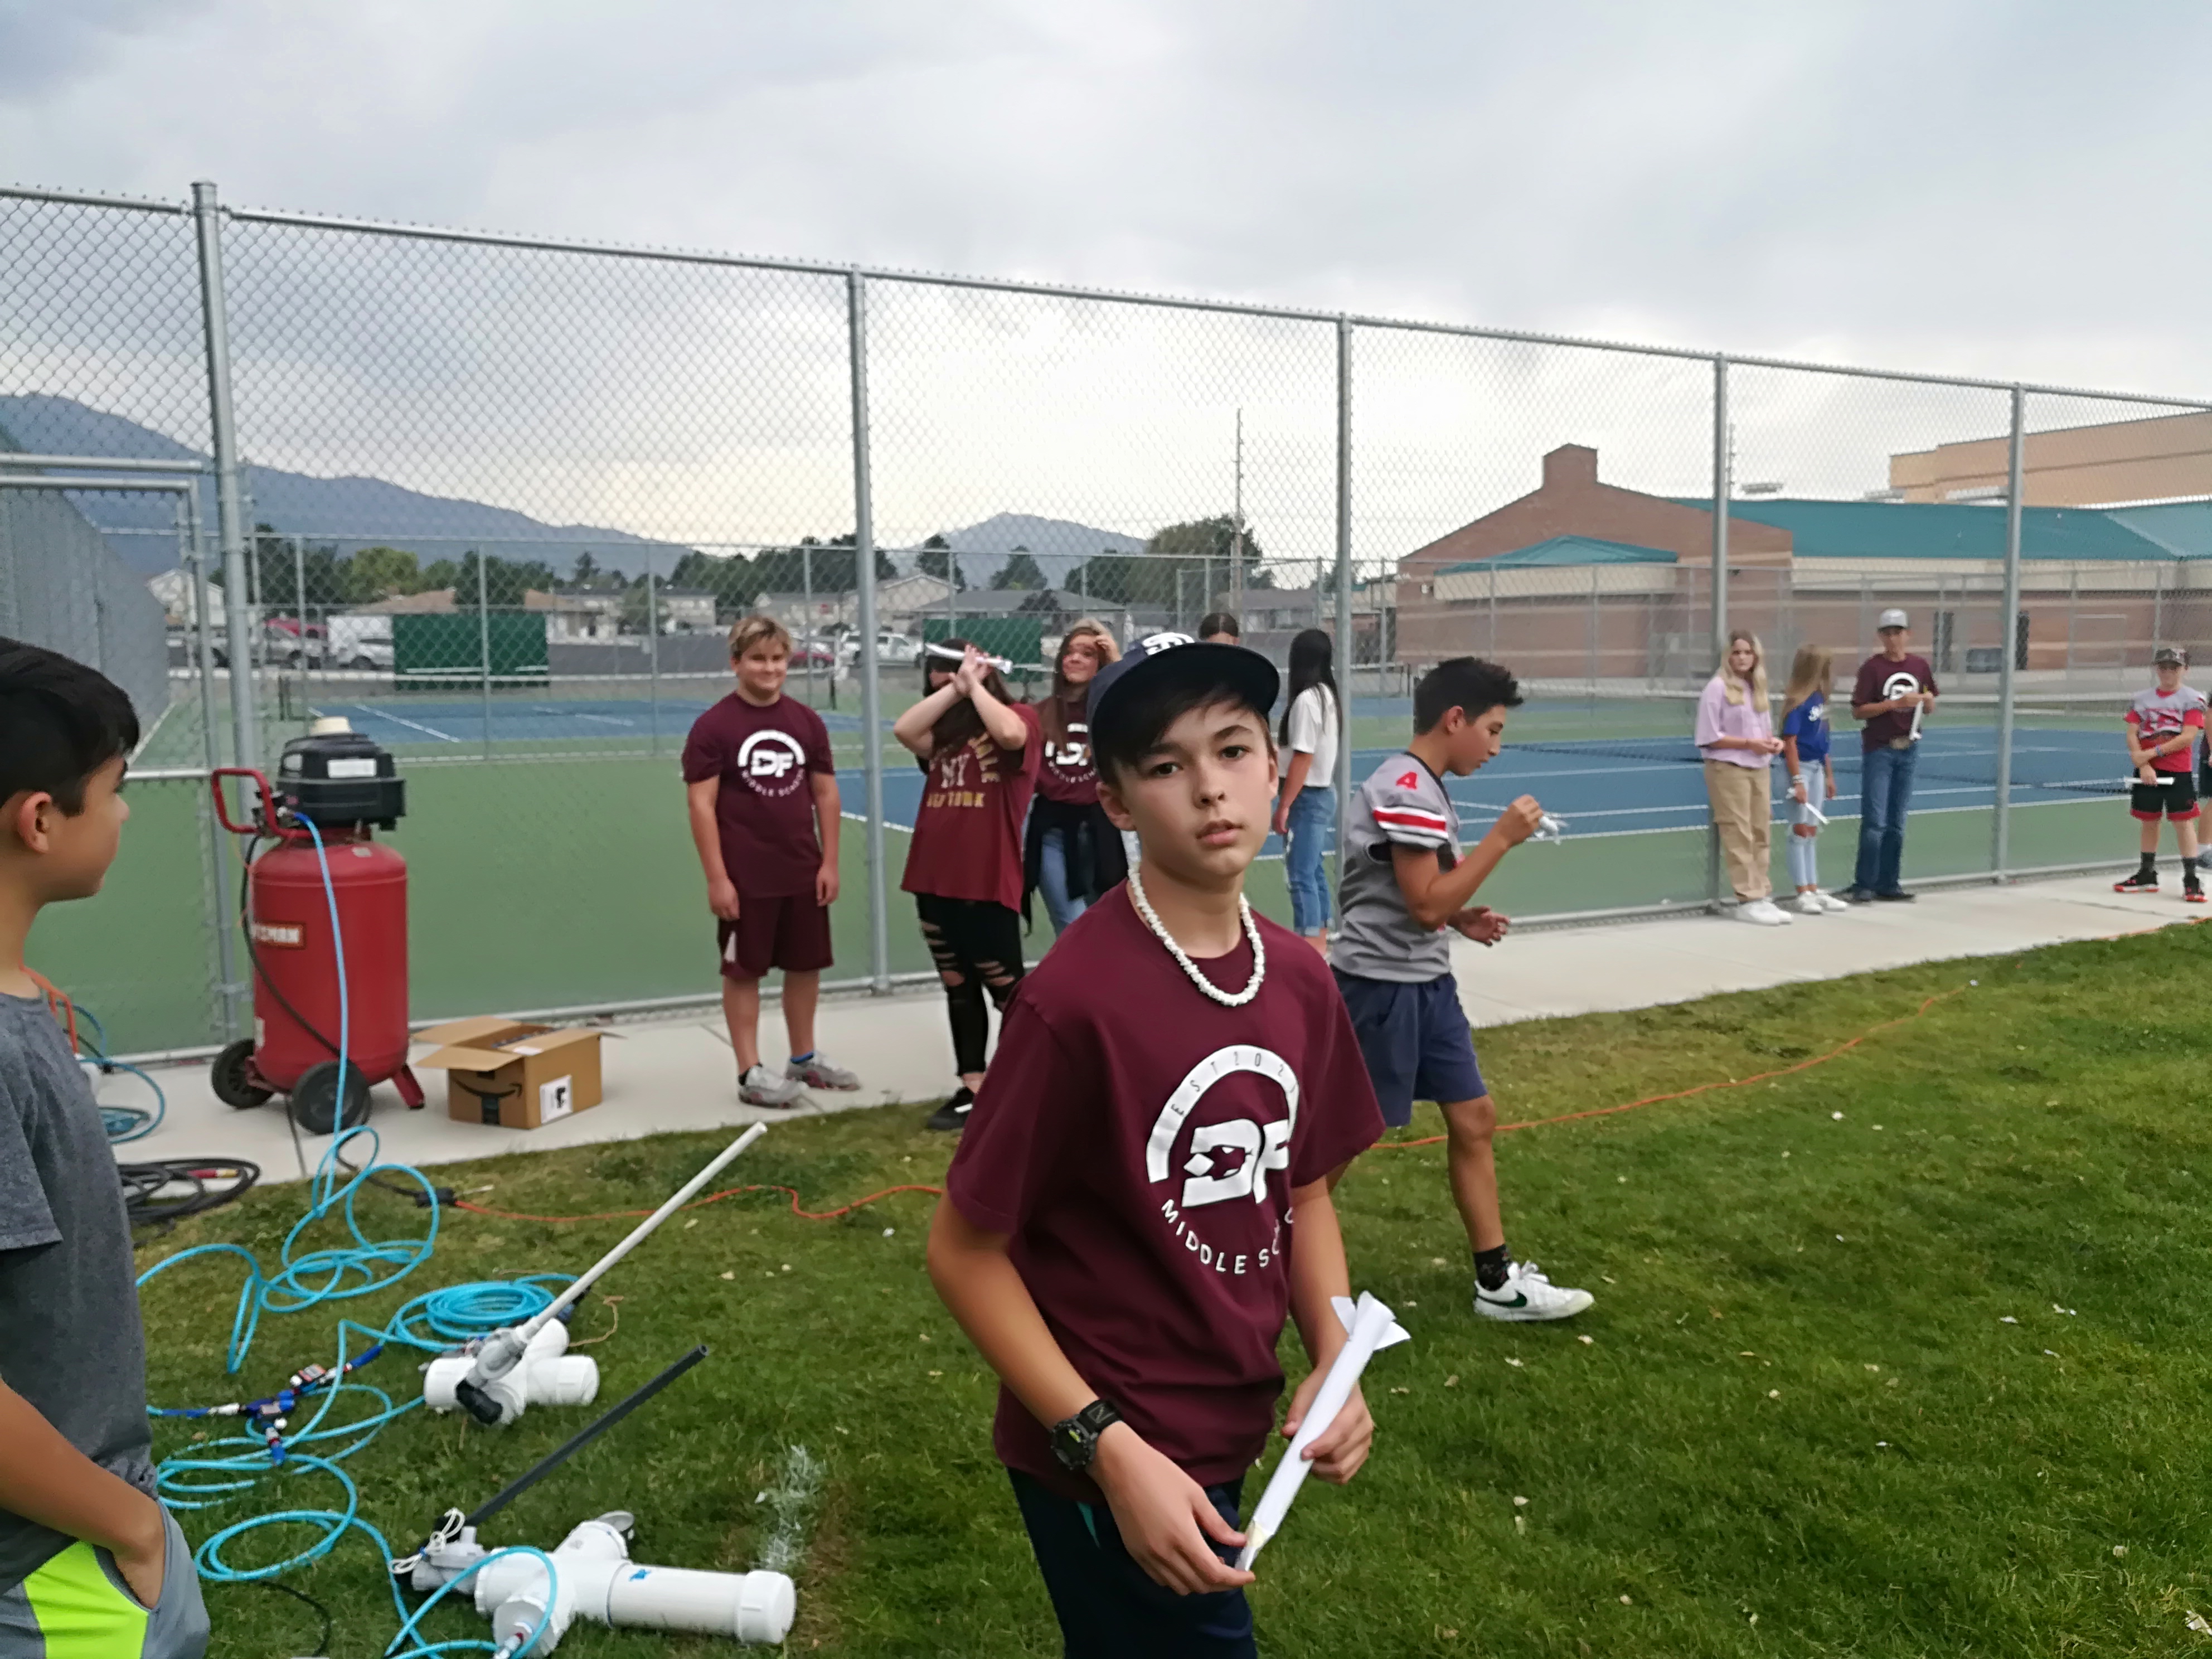 Students gathered to launch paper rockets